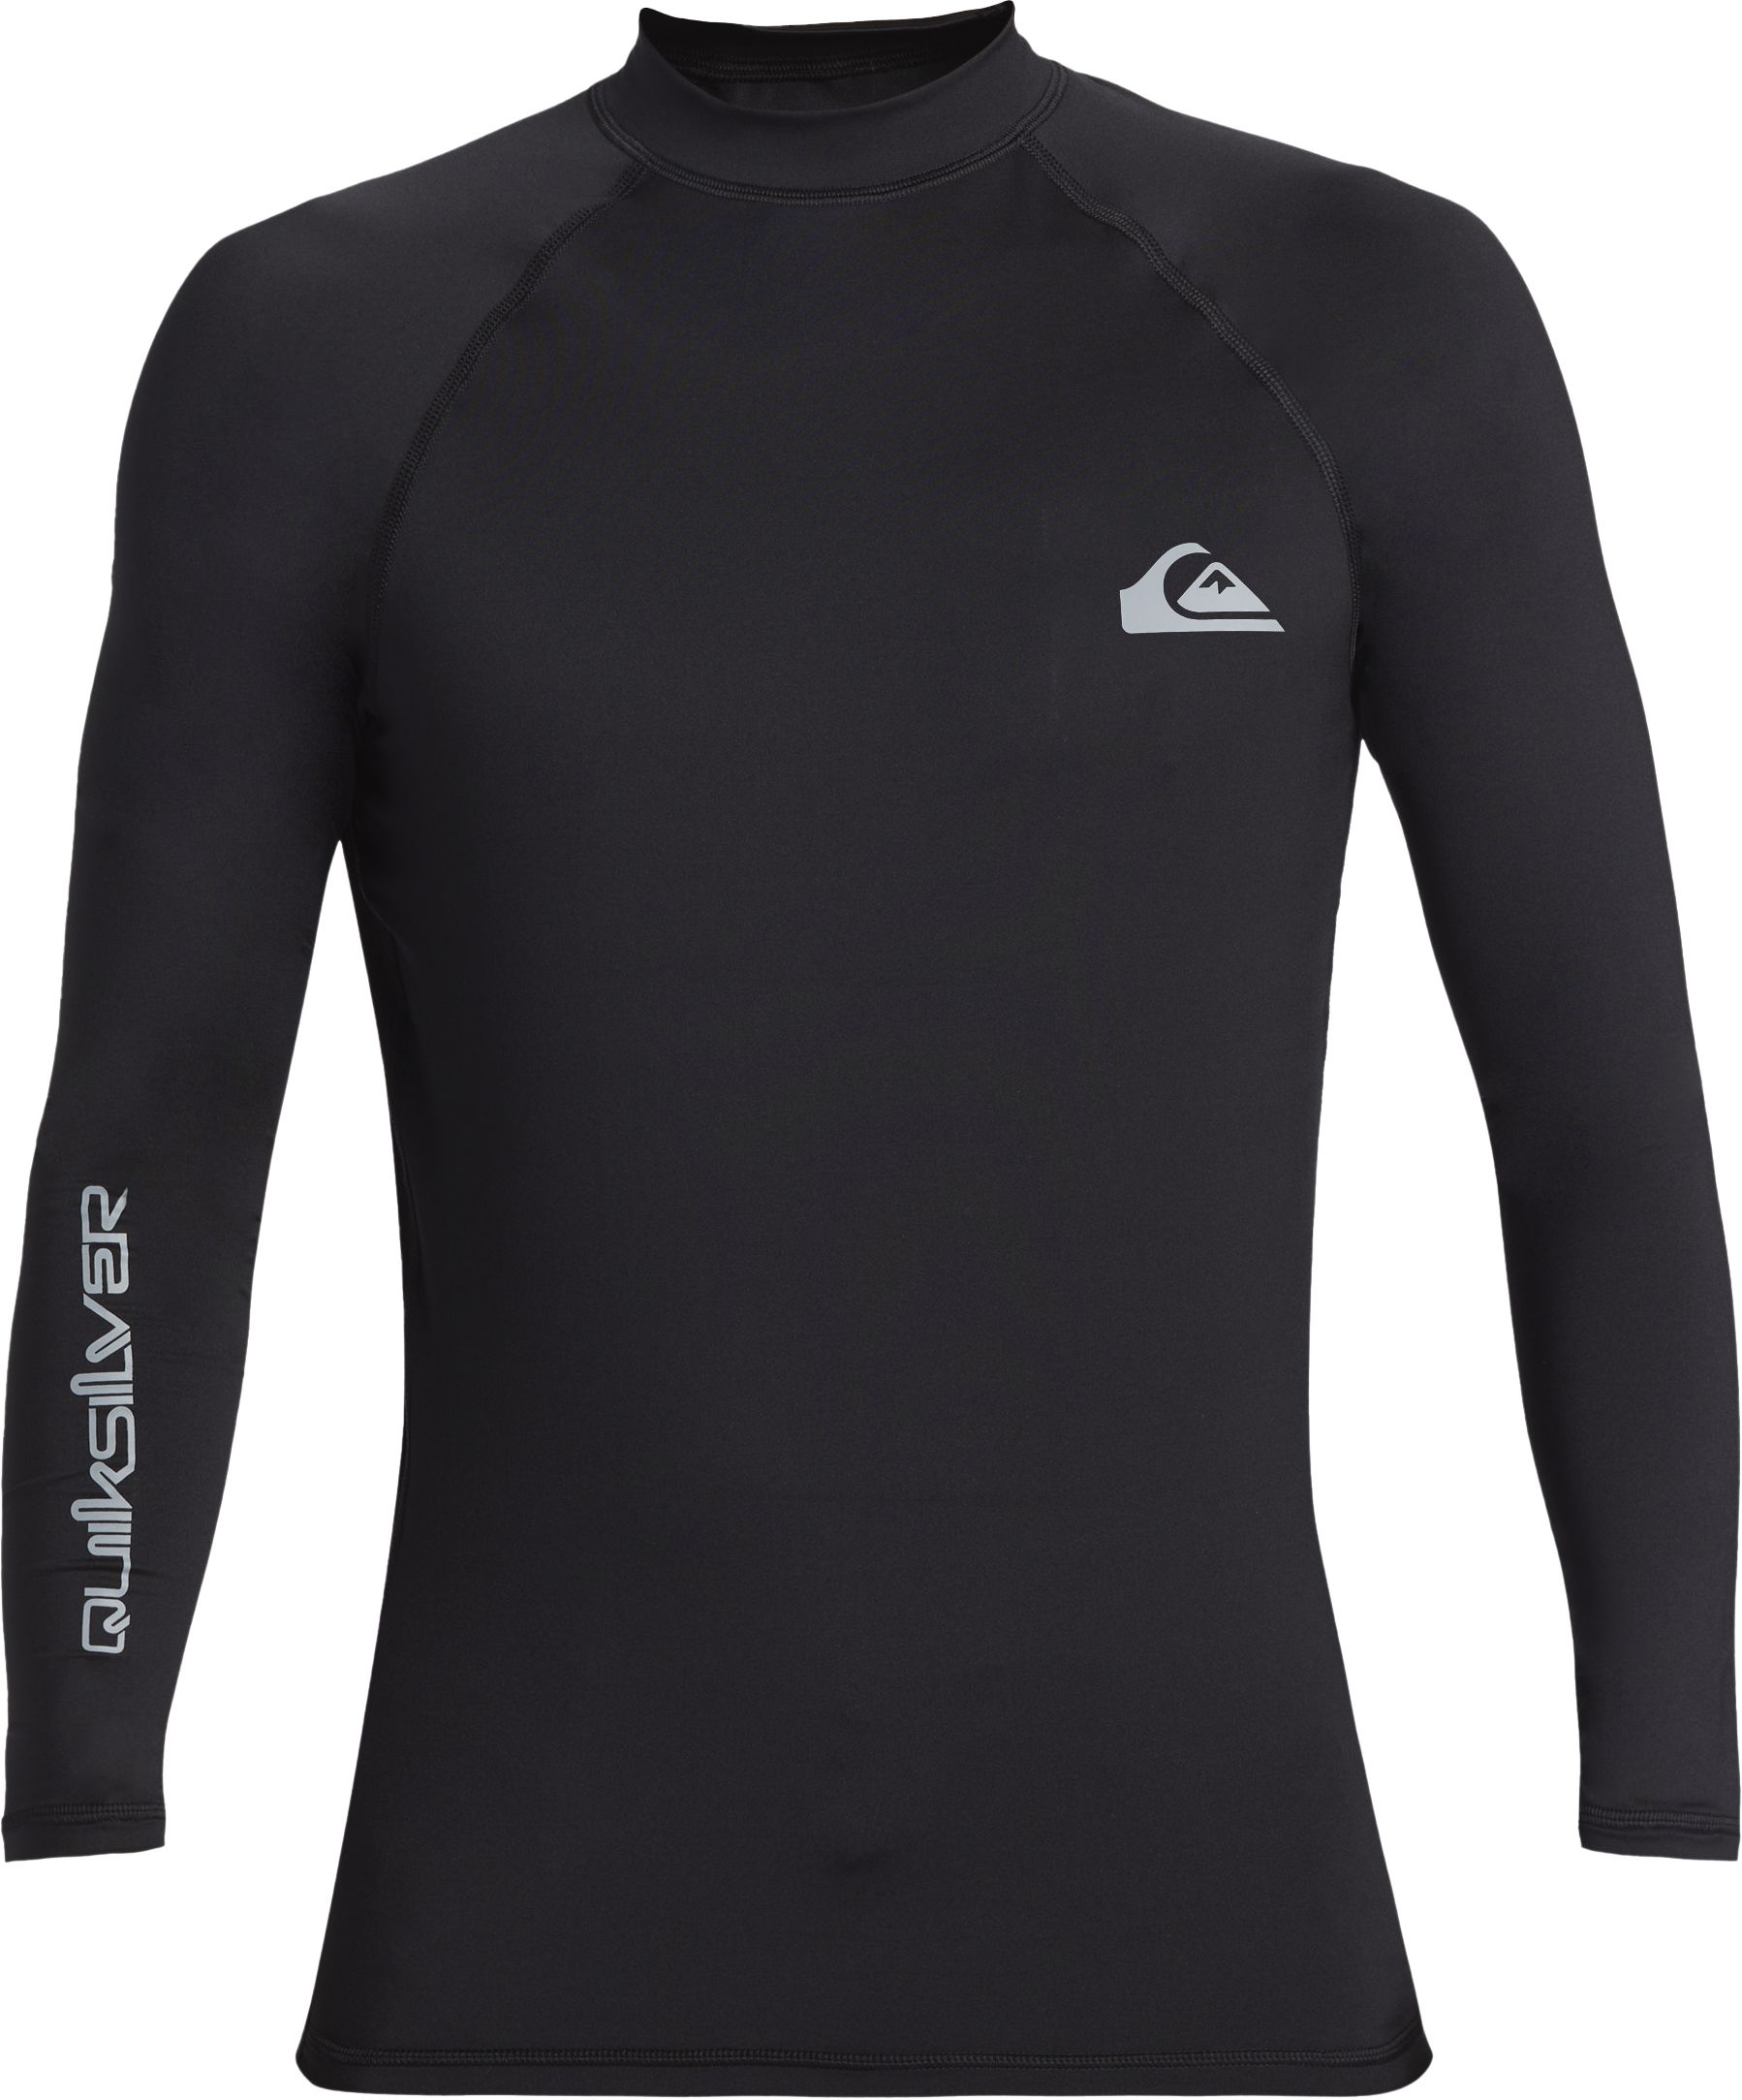 QUIKSILVER, EVERYDAY UPF50 LS YOUTH